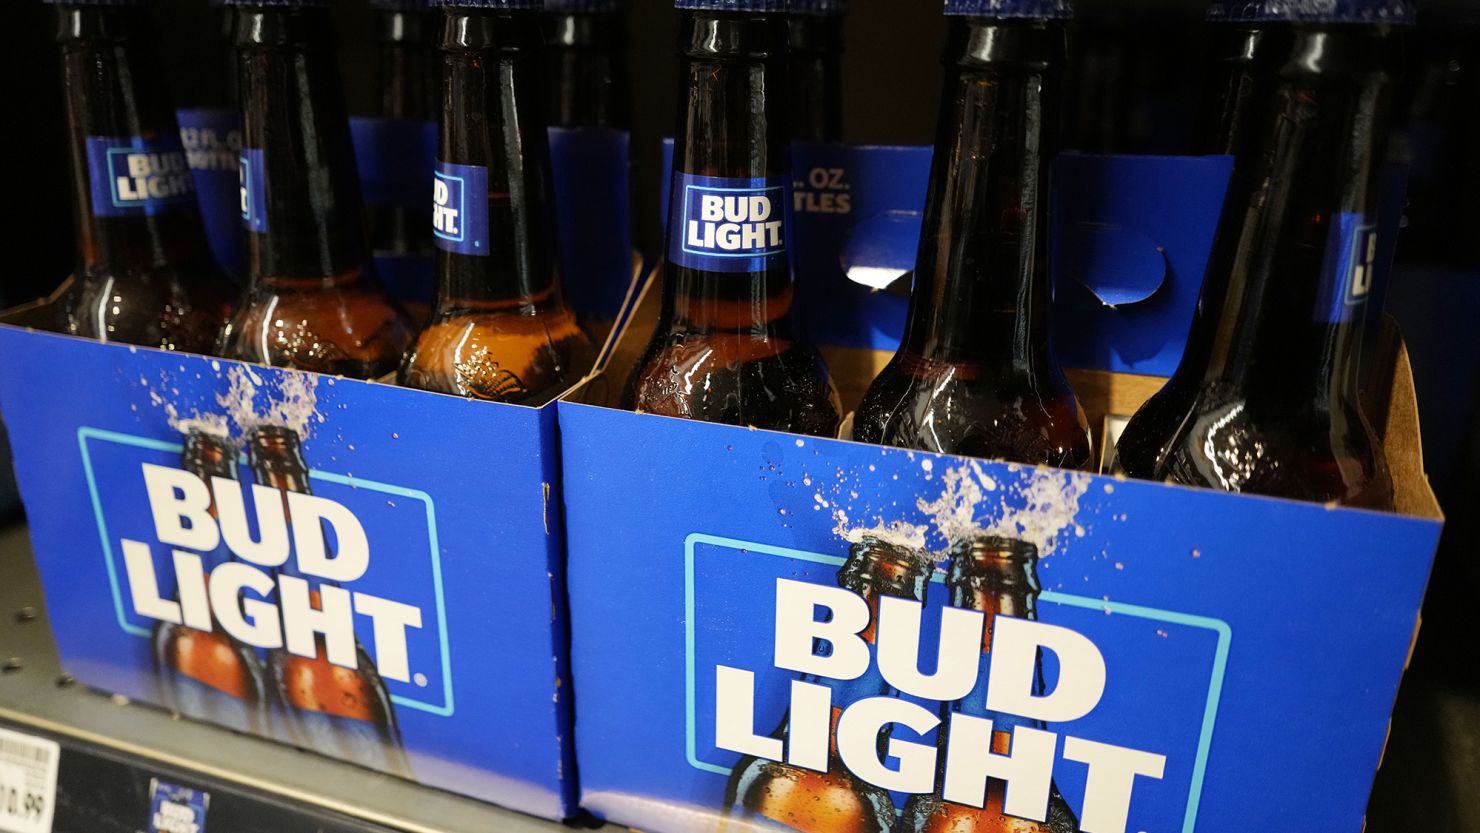 Bottles of Bud Light beer are seen at a grocery store in Glenview, Ill., Tuesday, April 25, 2023.